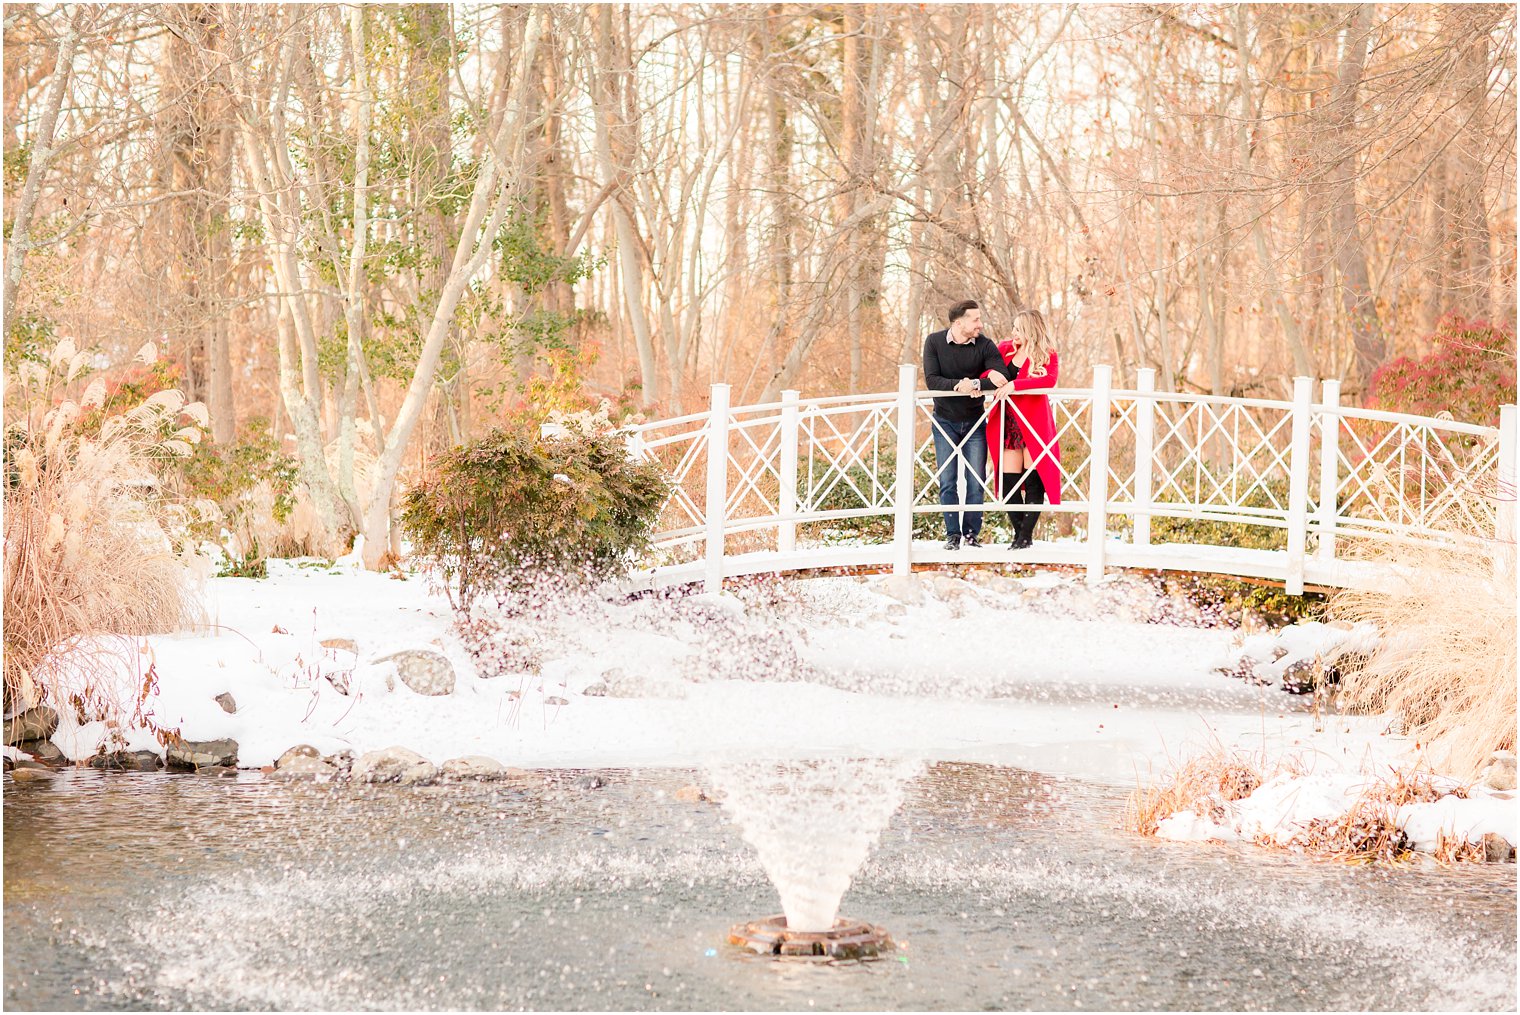 Couple on a white bride during engagement session